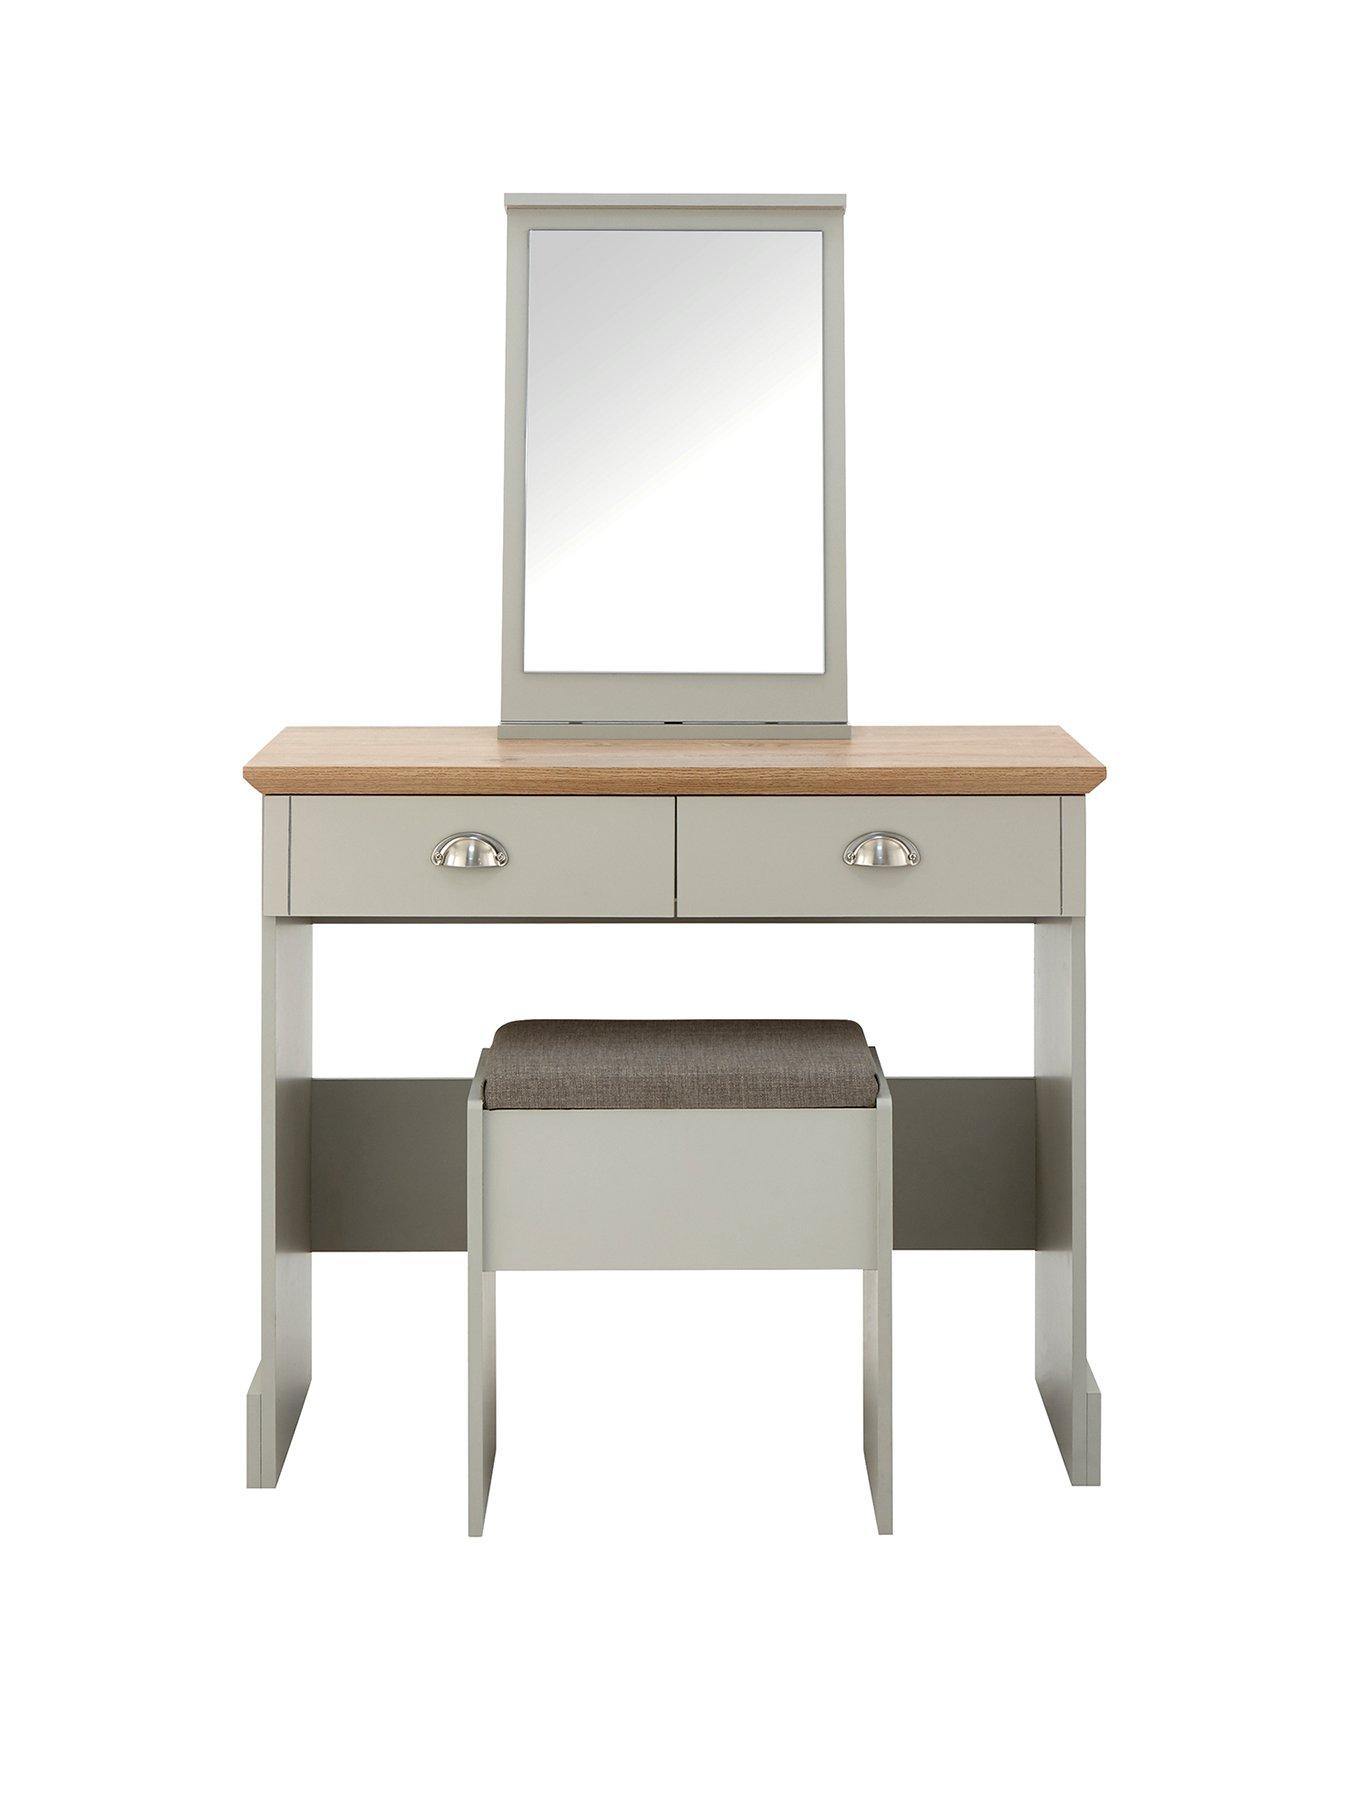 White Faux Leather Padded Top and 12 Bevelled Edge Mirrored Glass Panels Modern Clean Design with Perfect Match to Mirror Dressing Tables. Luxury Venetian Vanity Dressing Table Mirror Stool 